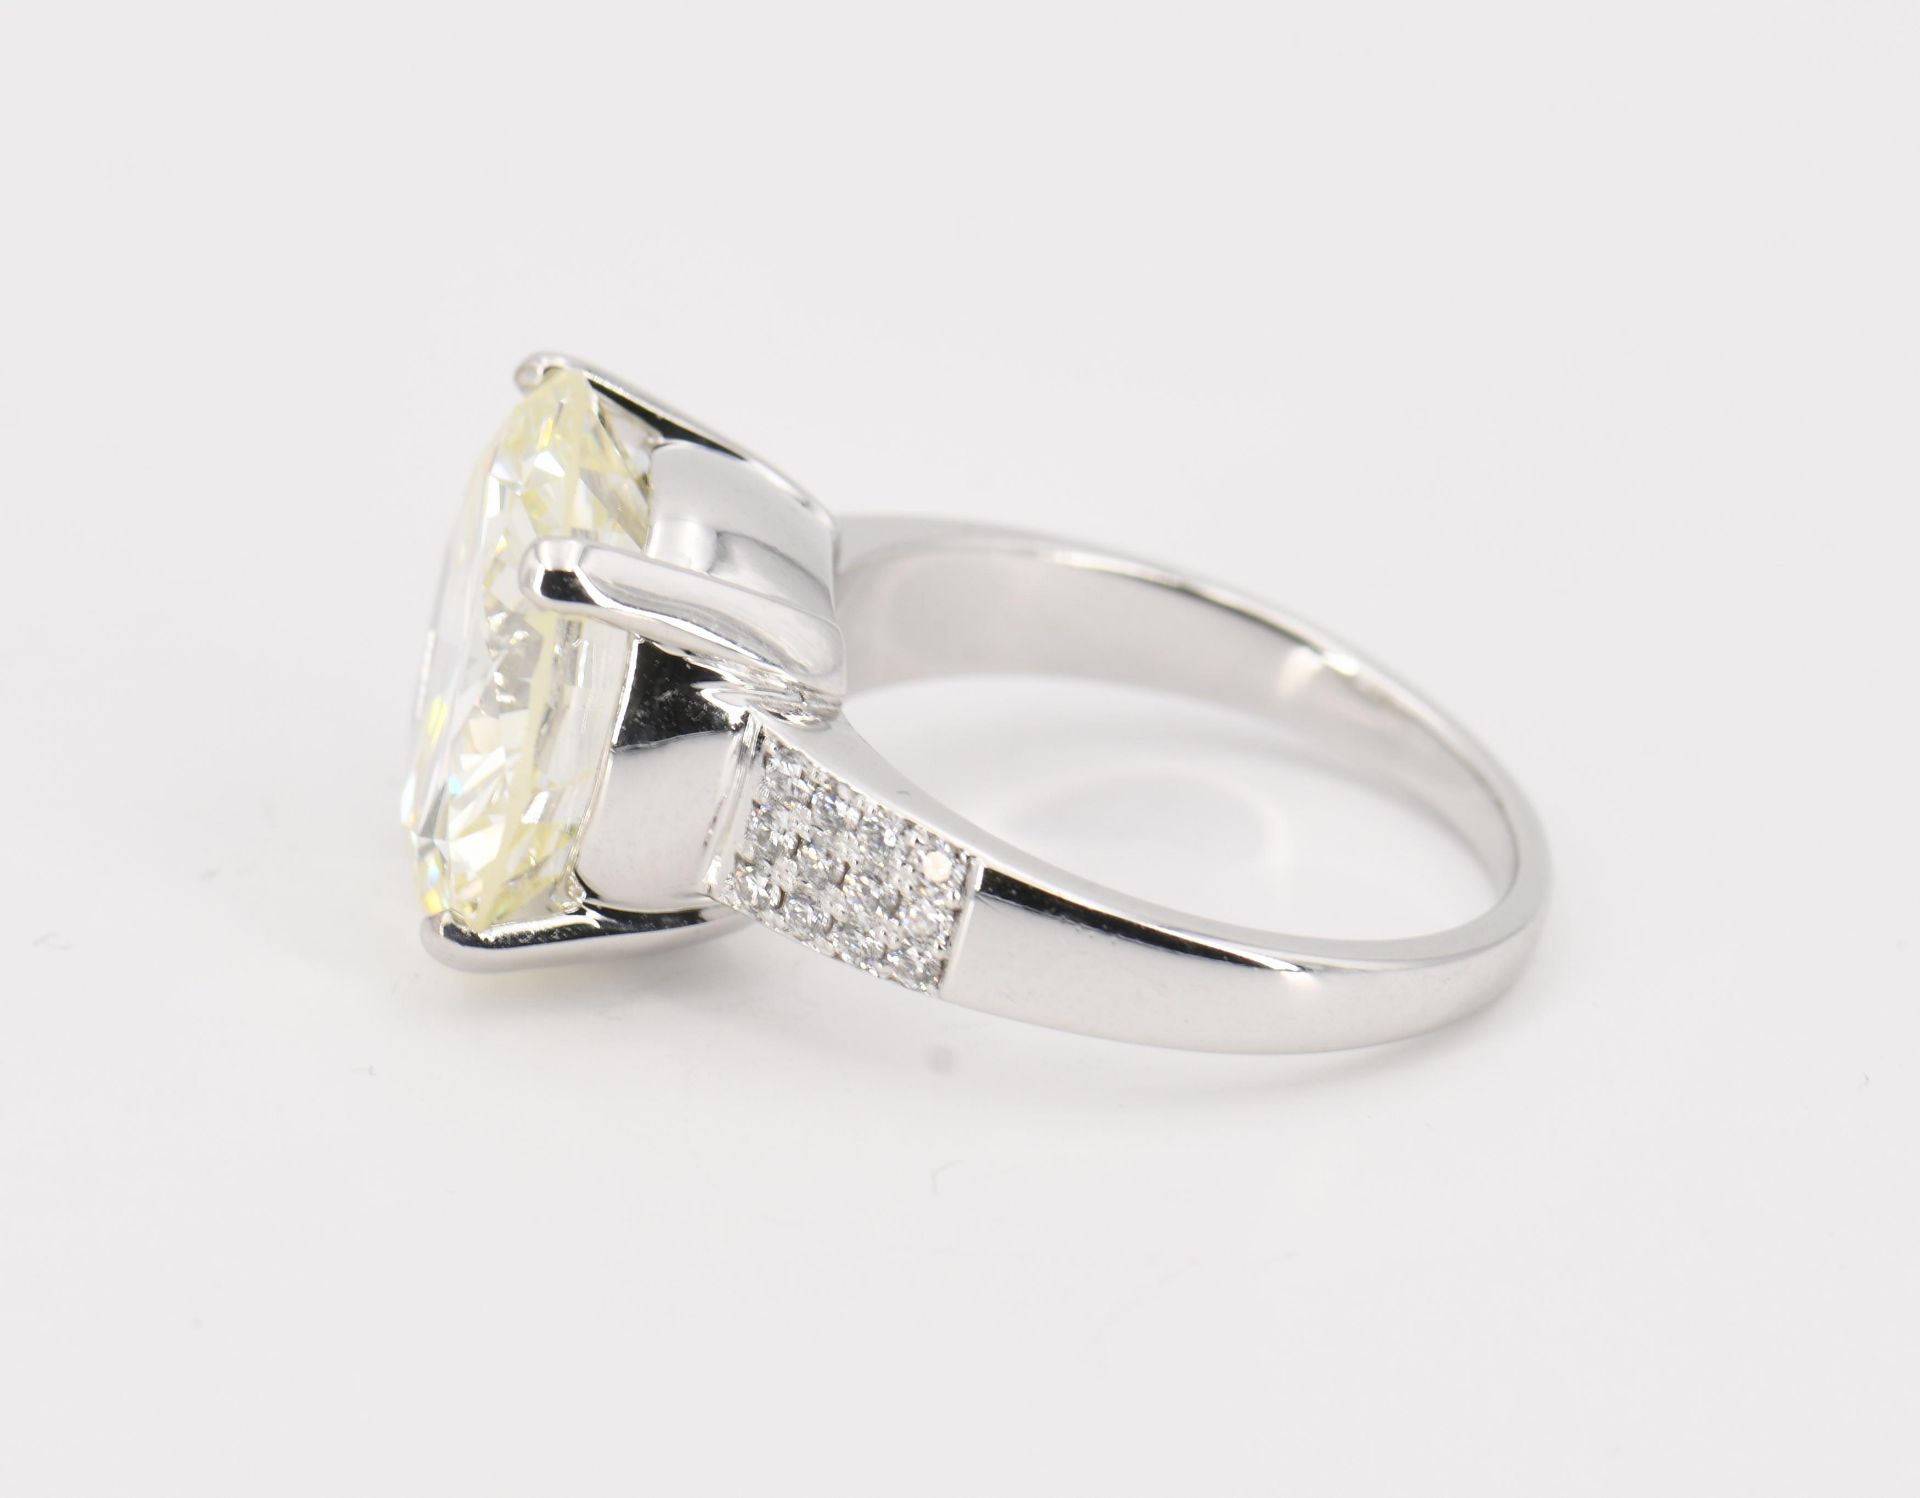 SolItaire-Ring - Image 4 of 7